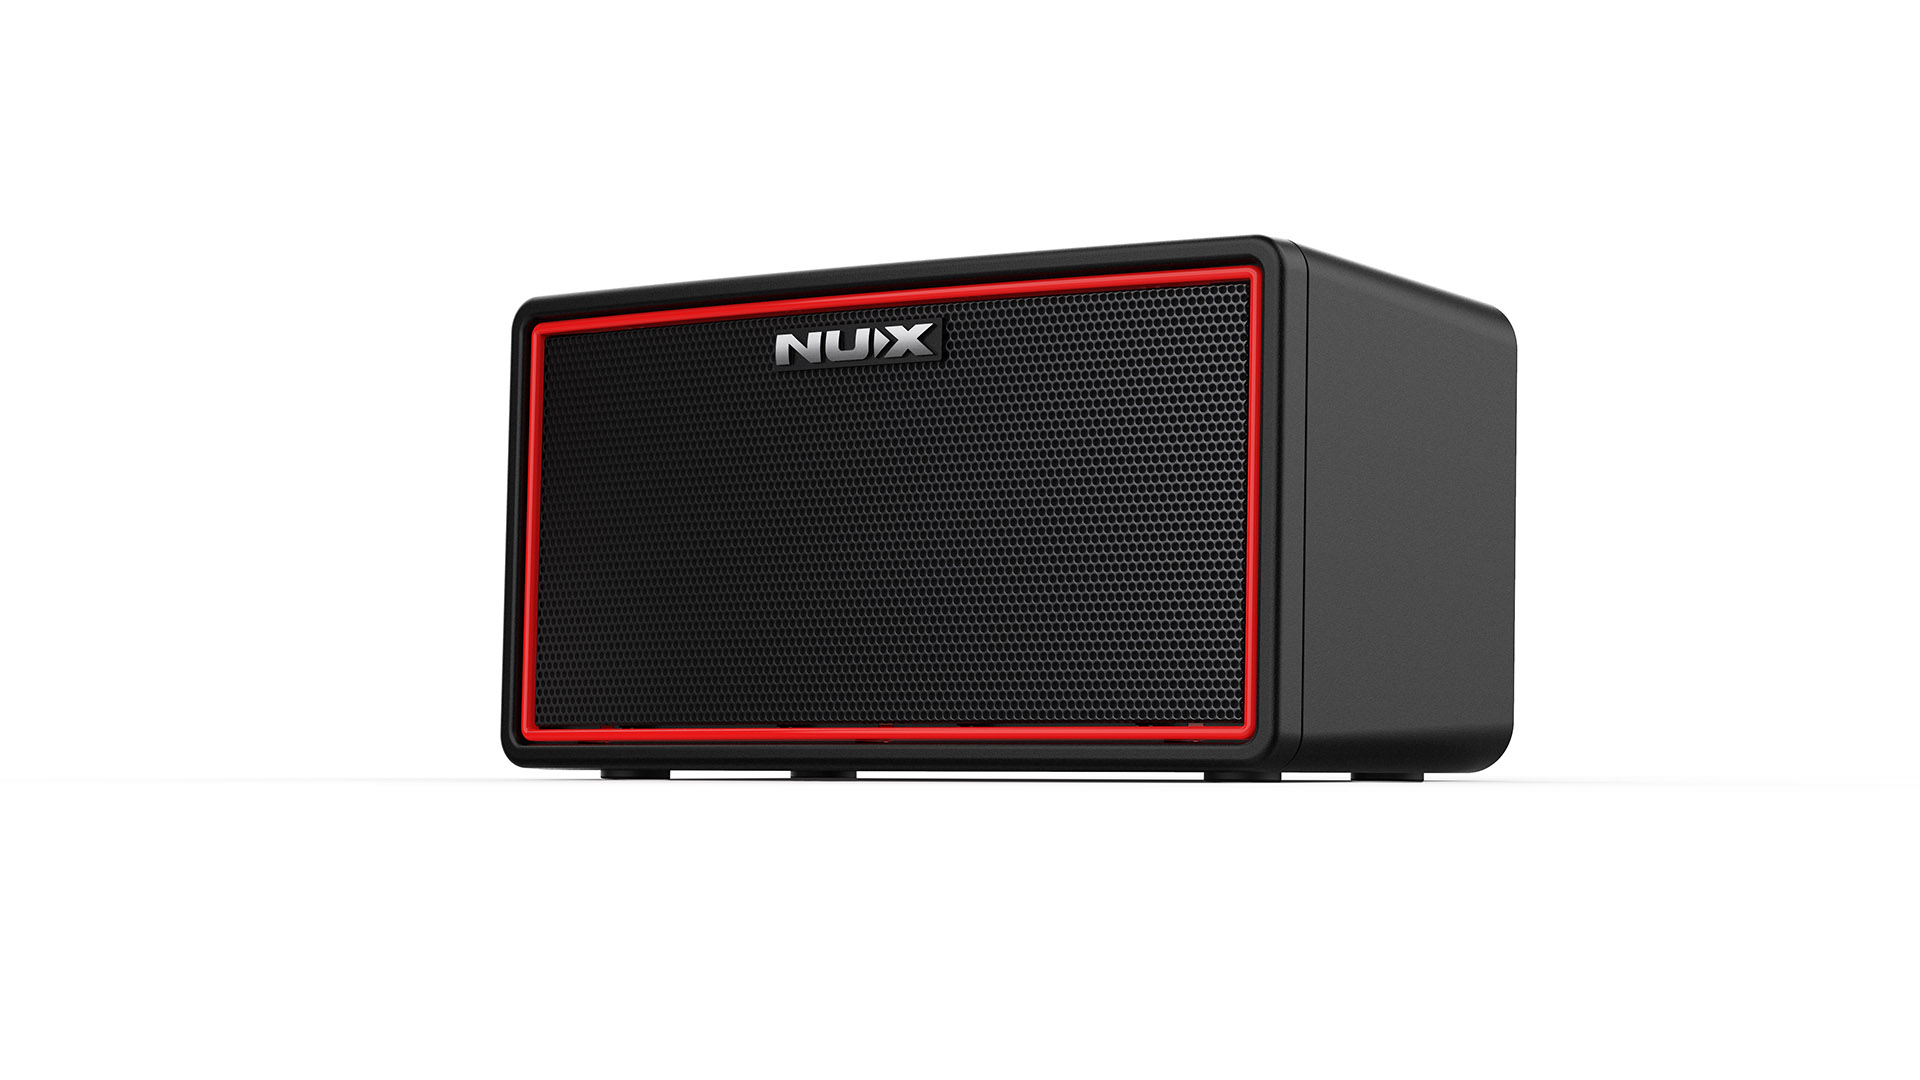 NUX Mighty Air Wireless Stereo Modeling Amplifier 【G'CLUB TOKYO】